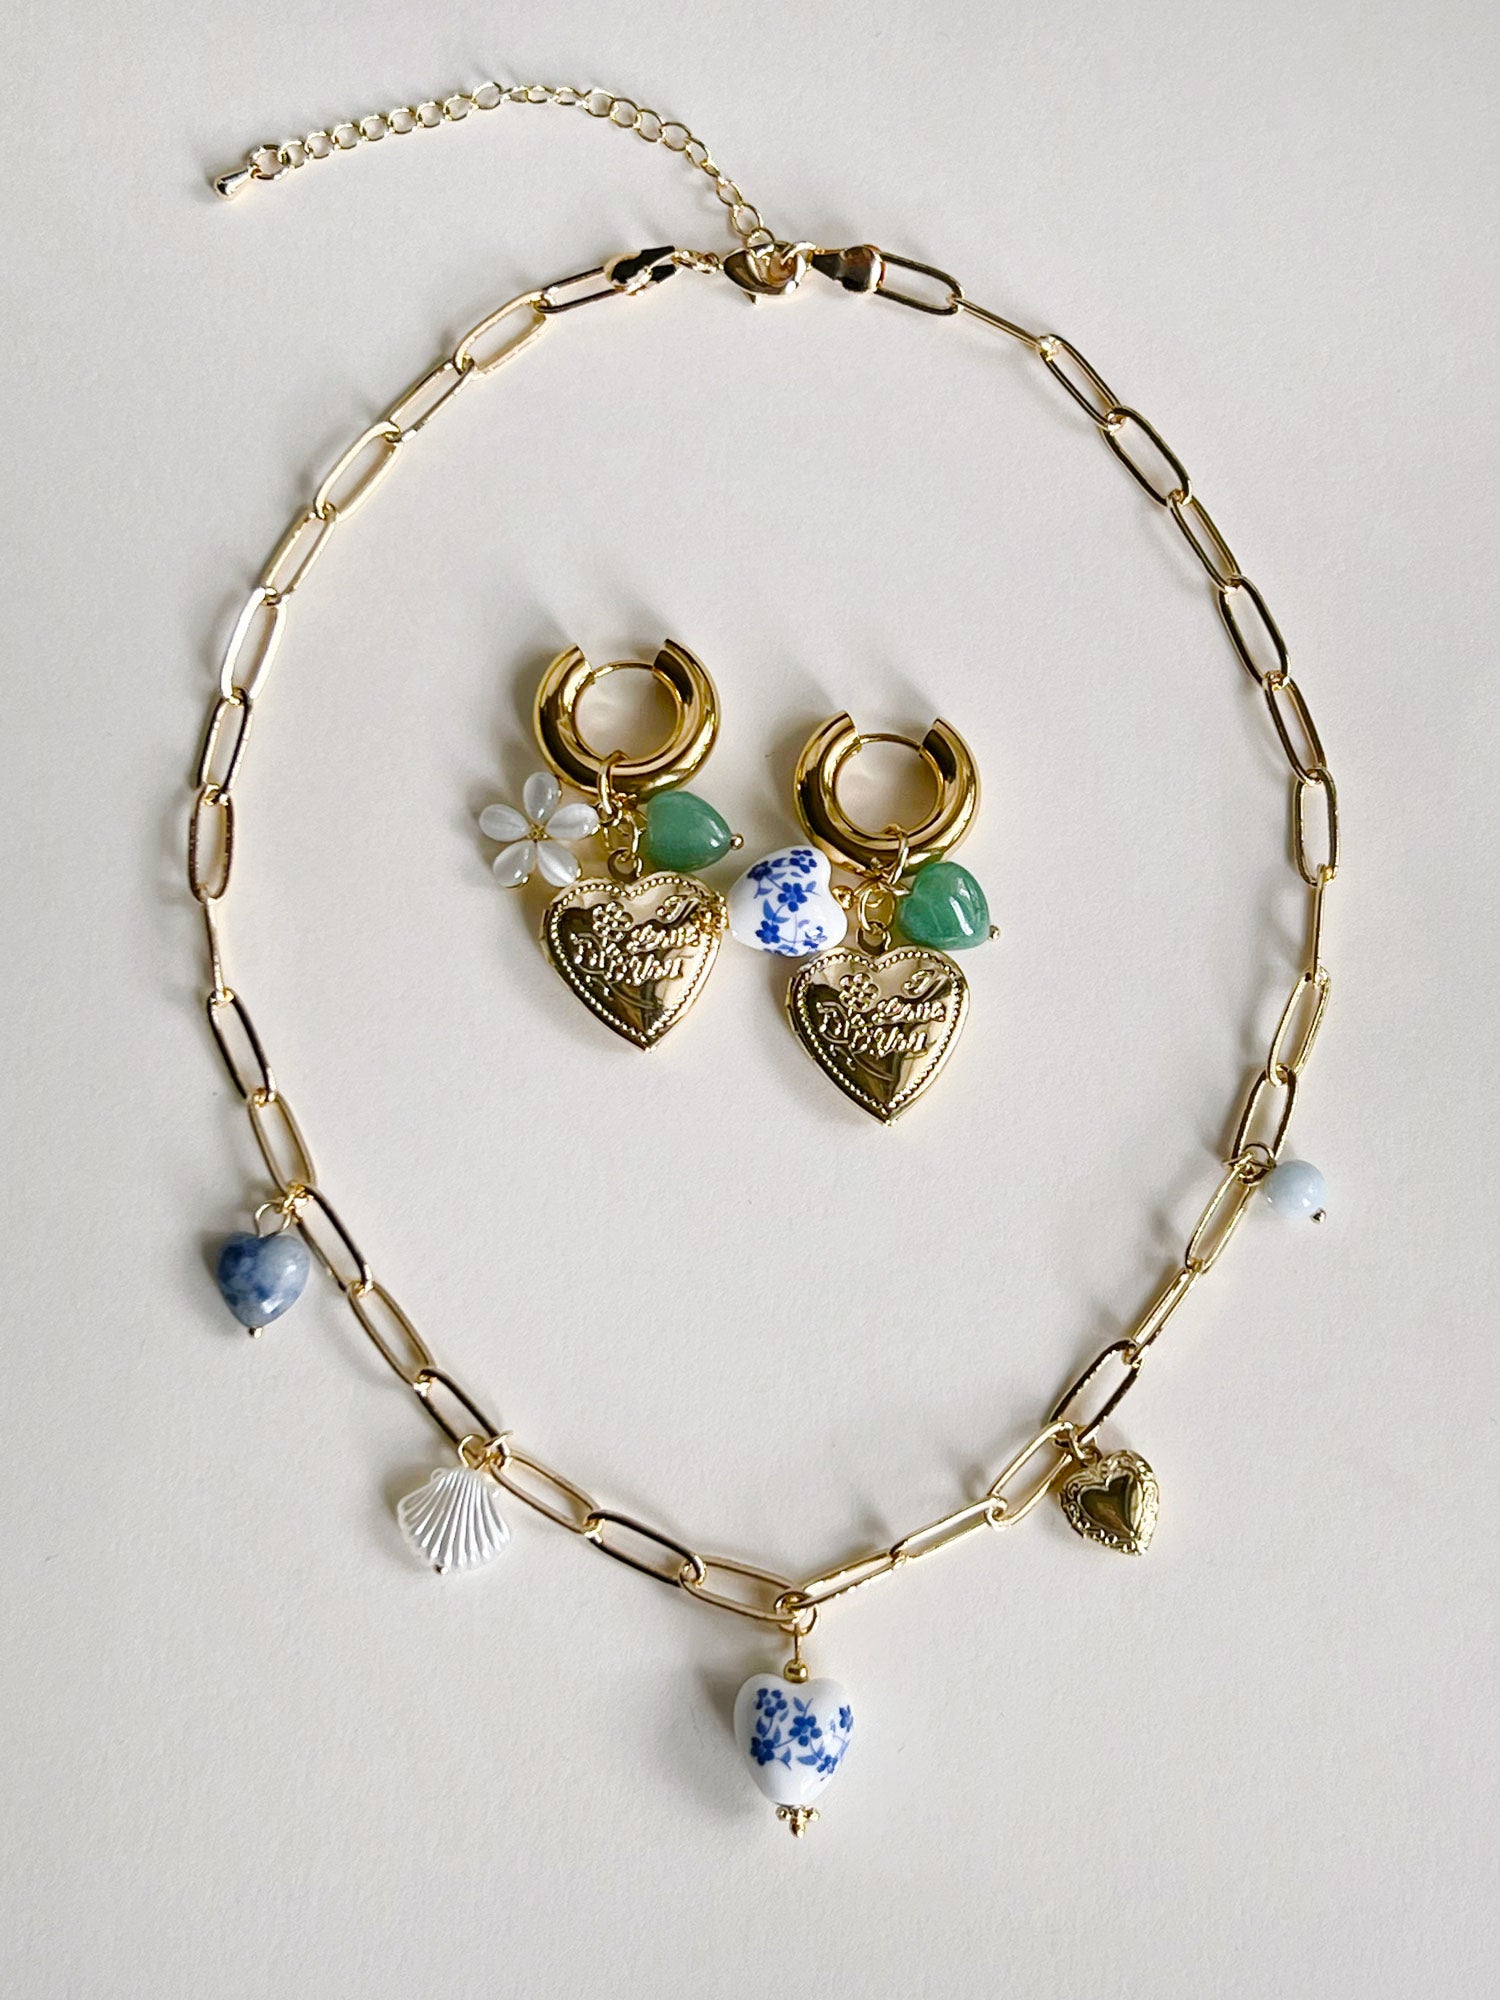 Eclectic Charm Necklace - Blue Heart Ceramic